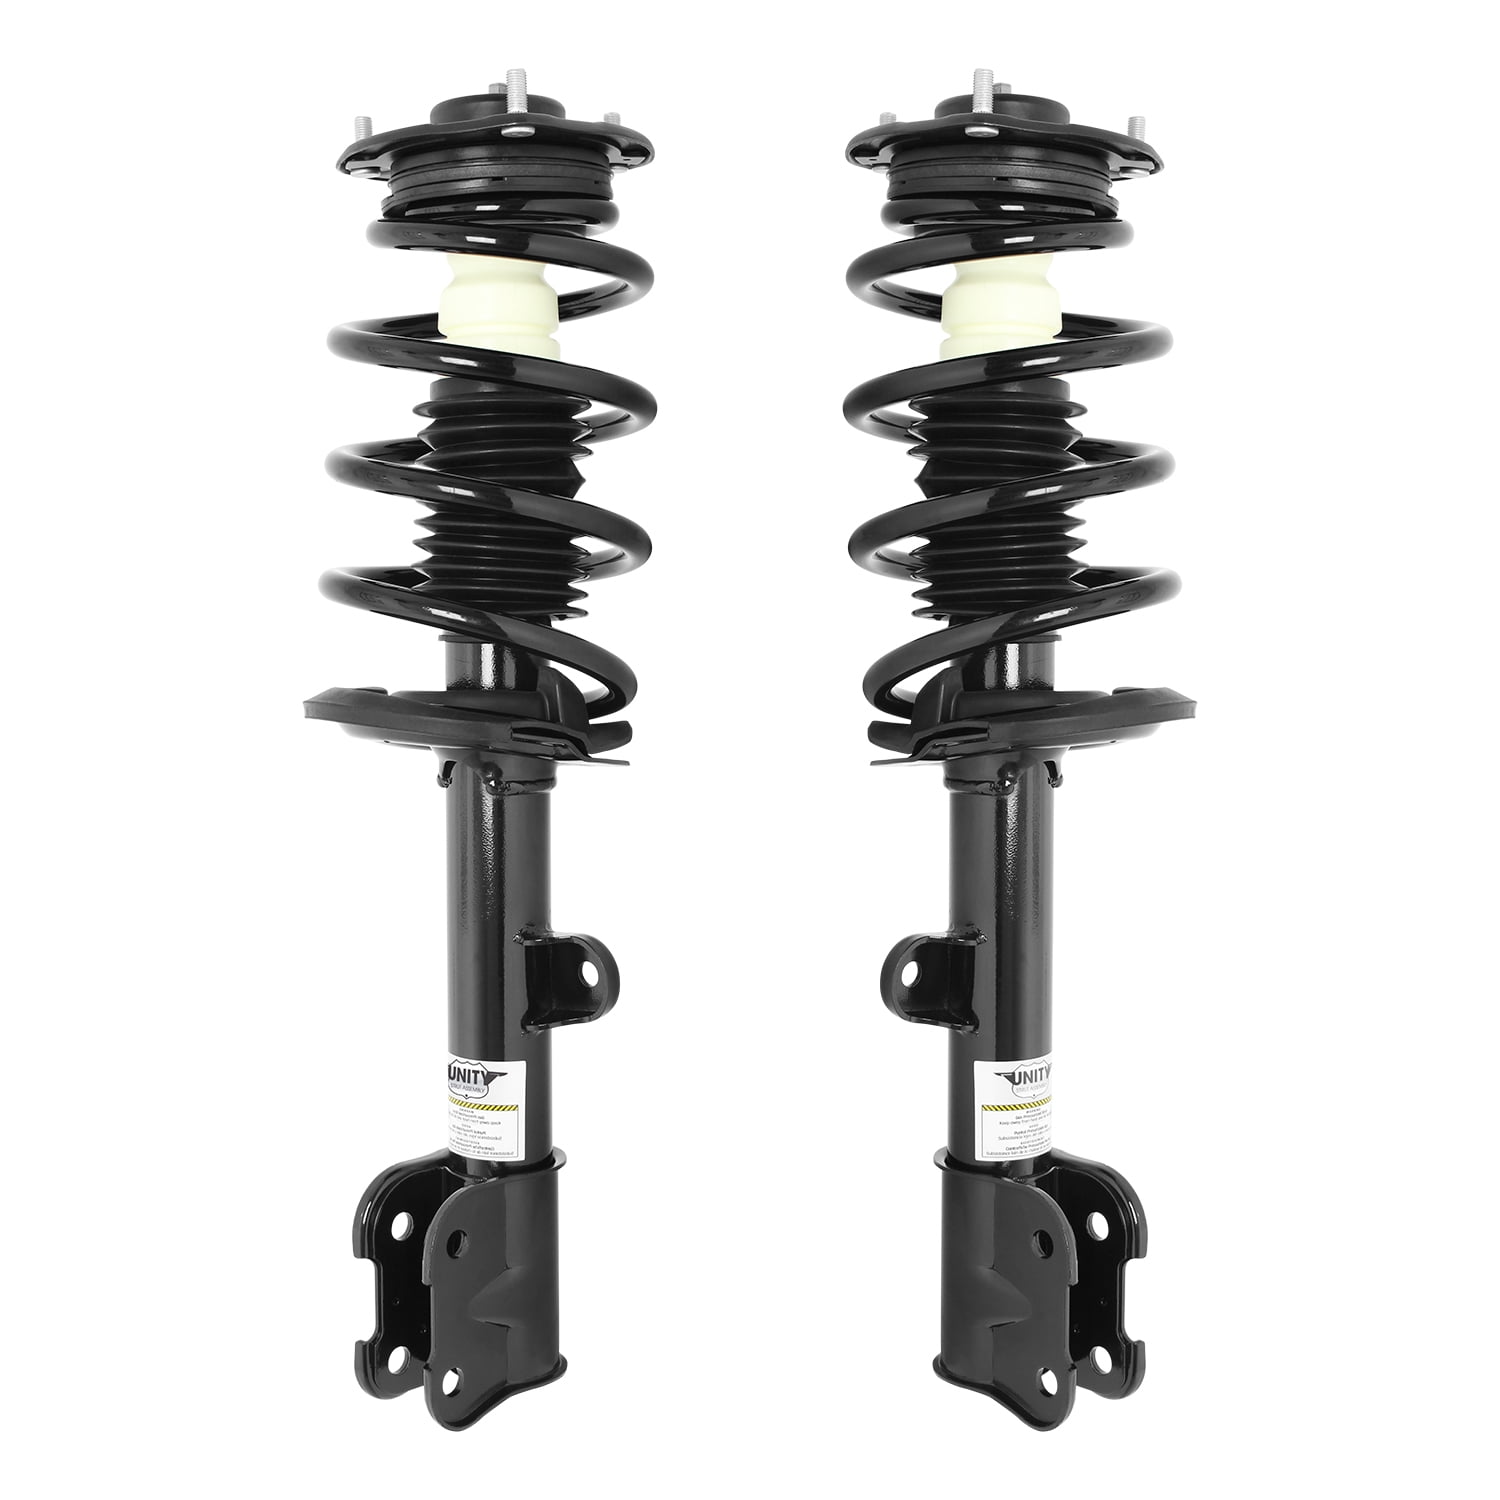 For 2010-2012 Hyundai Santa Fe 2 Front Ready Complete Struts Shocks Absorbers